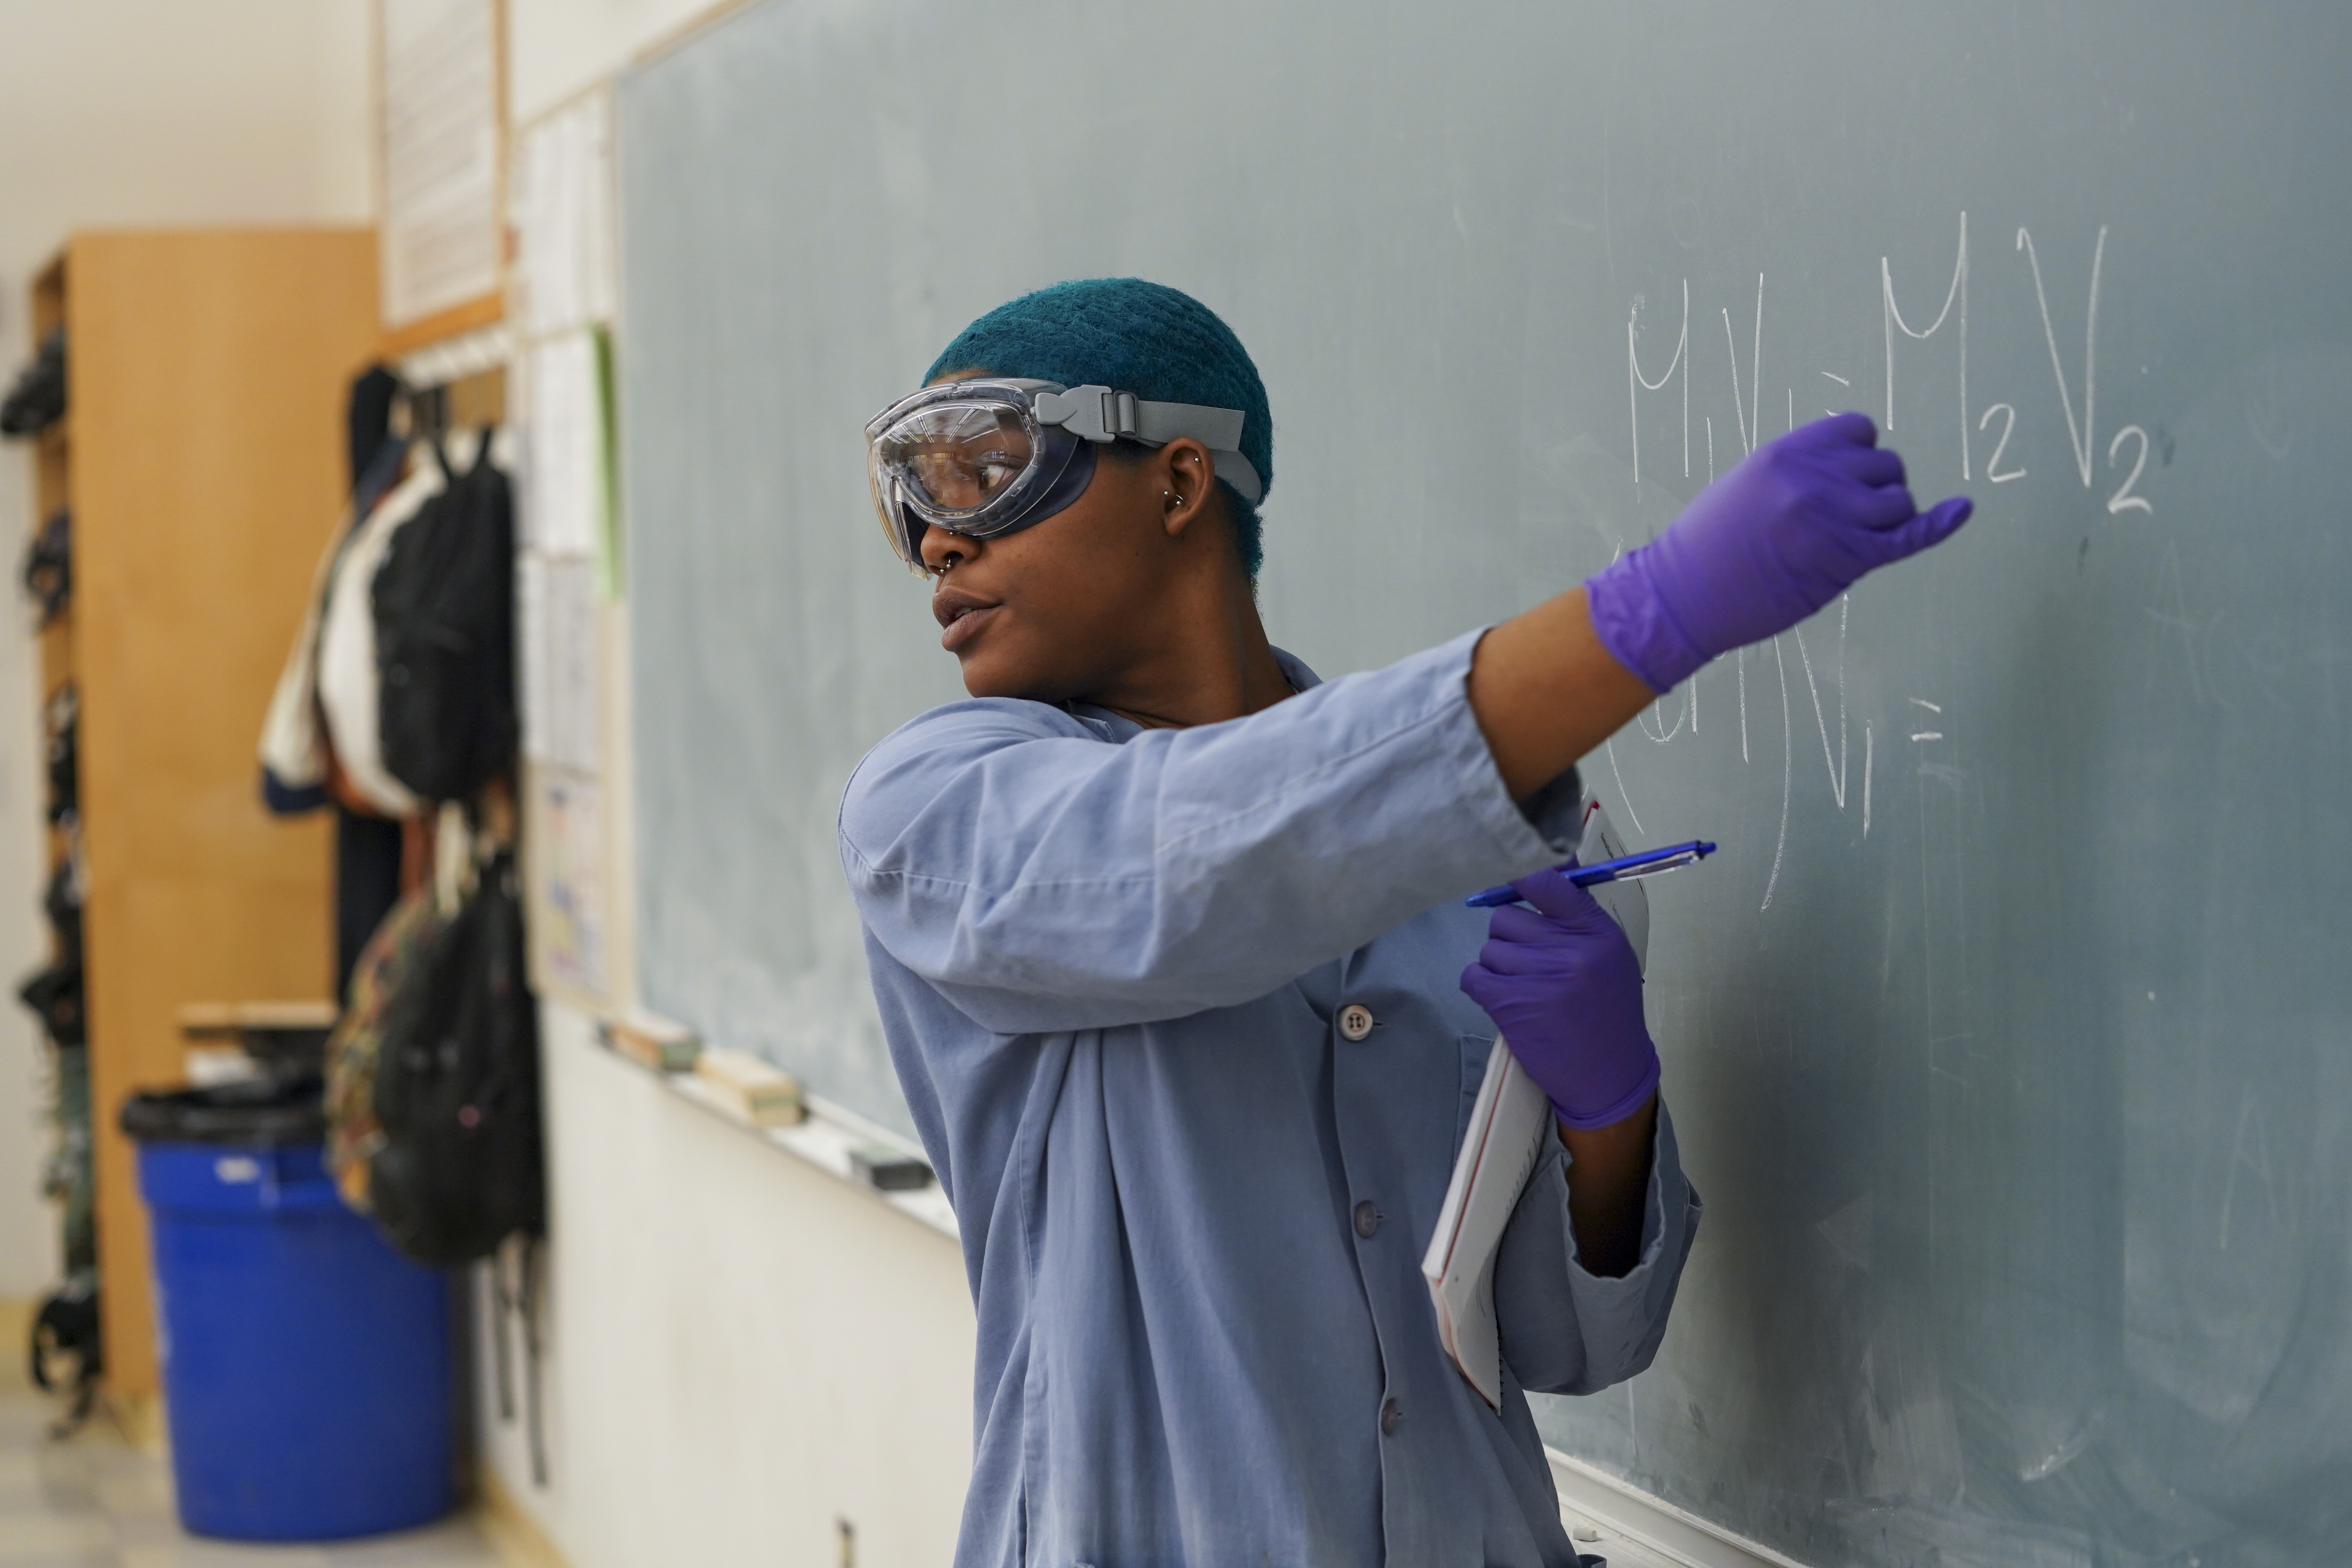 A person with green hair wearing lab goggles, gloves and a lab coat gestures as they write an equation on a chalkboard in a classroom. 